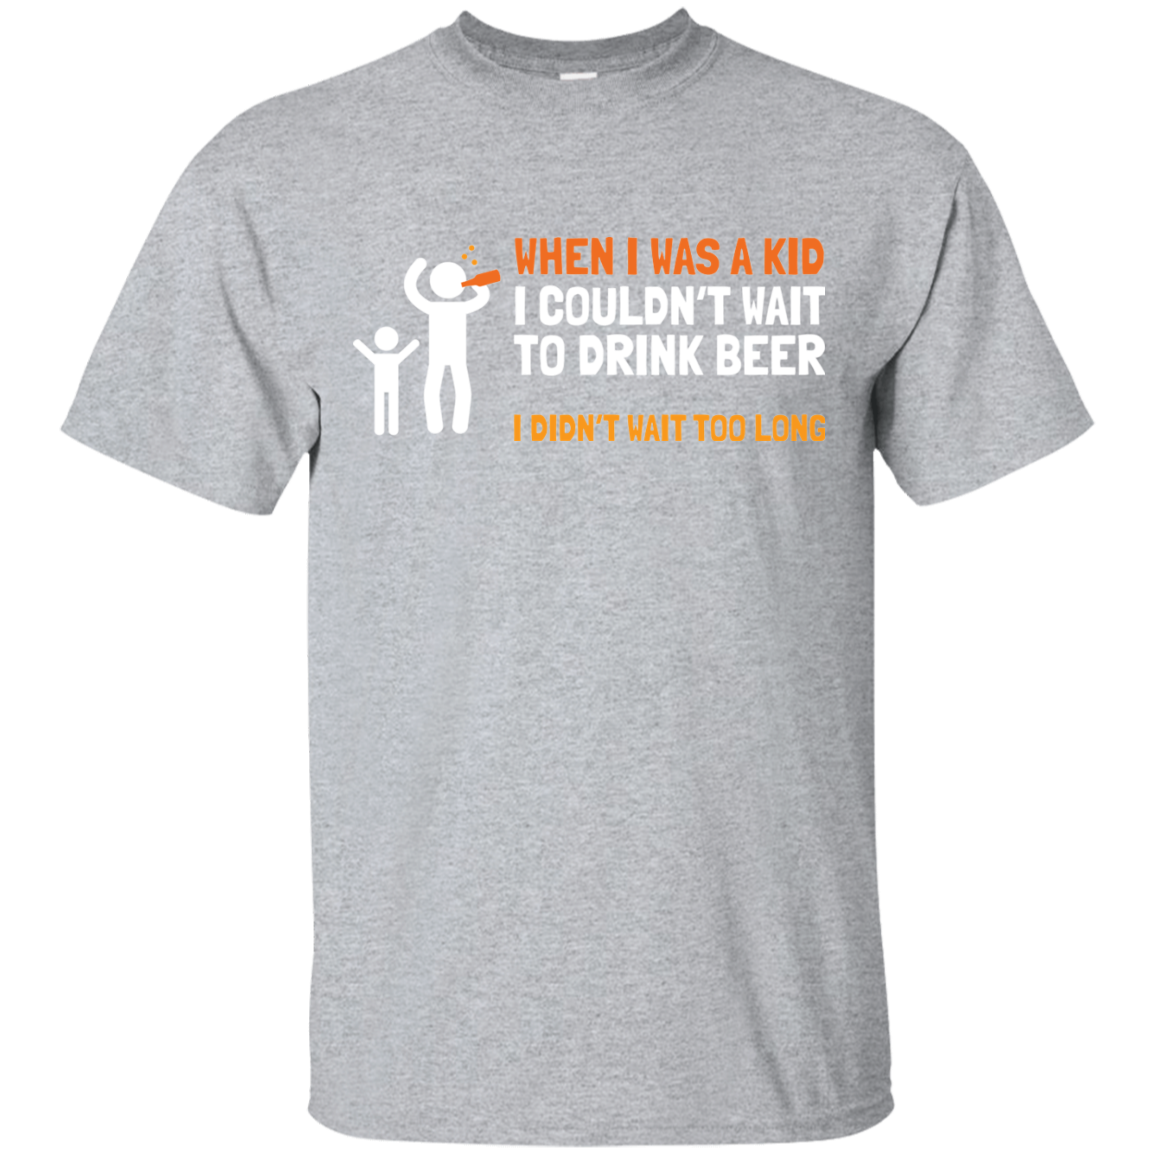 When I Was Kid, I couldn't Wait To Drink Beer T-Shirt Apparel - The Beer Lodge